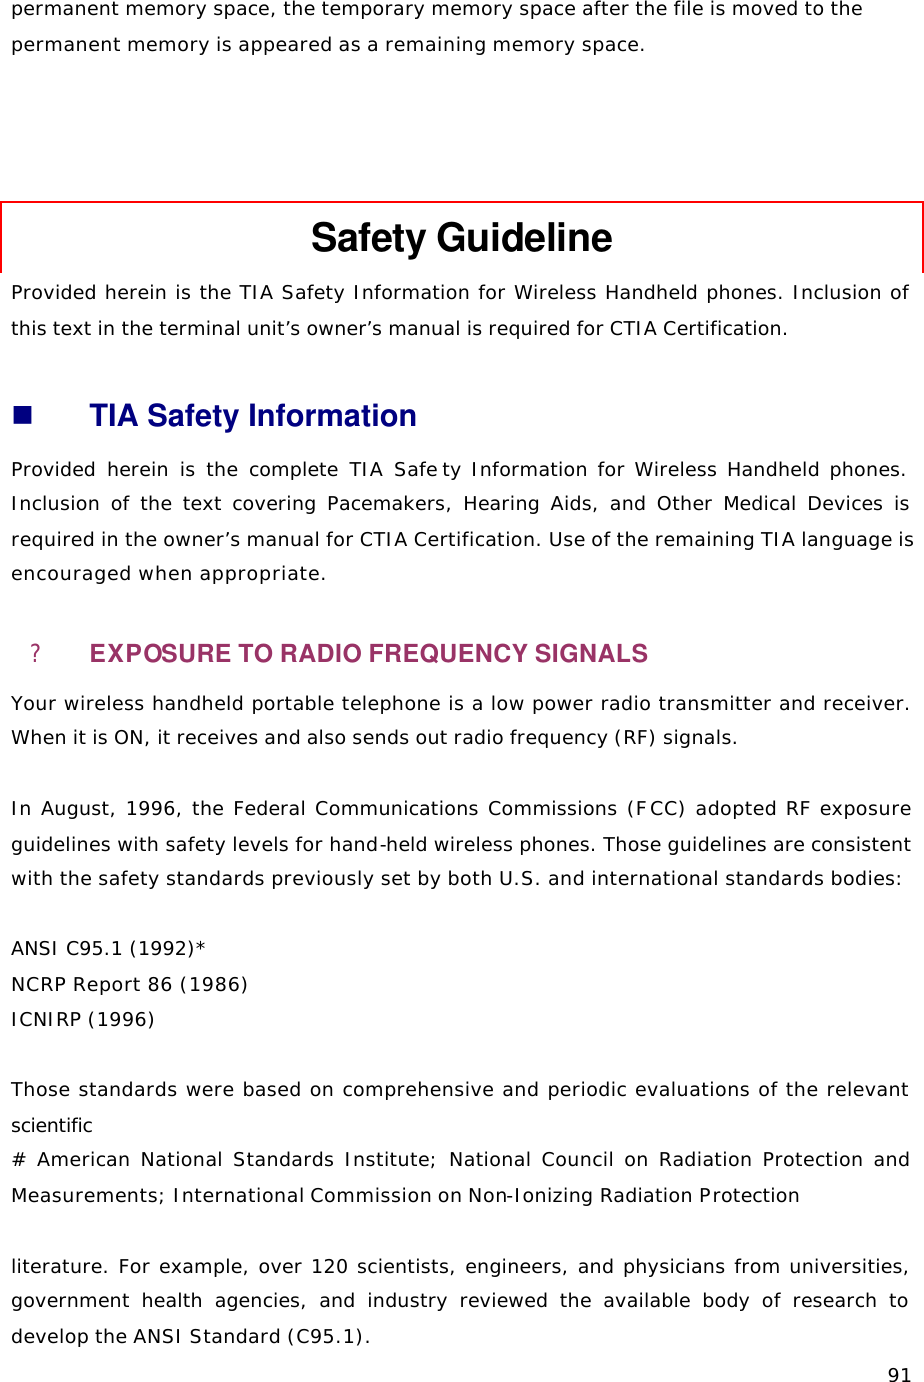   91permanent memory space, the temporary memory space after the file is moved to the permanent memory is appeared as a remaining memory space.     Safety Guideline Provided herein is the TIA Safety Information for Wireless Handheld phones. Inclusion of this text in the terminal unit’s owner’s manual is required for CTIA Certification.  n TIA Safety Information Provided herein is the complete TIA Safe ty Information for Wireless Handheld phones. Inclusion of the text covering Pacemakers, Hearing Aids, and Other Medical Devices is required in the owner’s manual for CTIA Certification. Use of the remaining TIA language is encouraged when appropriate. ? EXPOSURE TO RADIO FREQUENCY SIGNALS Your wireless handheld portable telephone is a low power radio transmitter and receiver. When it is ON, it receives and also sends out radio frequency (RF) signals.  In August, 1996, the Federal Communications Commissions (FCC) adopted RF exposure guidelines with safety levels for hand-held wireless phones. Those guidelines are consistent with the safety standards previously set by both U.S. and international standards bodies:  ANSI C95.1 (1992)*  NCRP Report 86 (1986) ICNIRP (1996)  Those standards were based on comprehensive and periodic evaluations of the relevant scientific # American National Standards Institute; National Council on Radiation Protection and Measurements; International Commission on Non-Ionizing Radiation Protection  literature. For example, over 120 scientists, engineers, and physicians from universities, government health agencies, and industry reviewed the available body of research to develop the ANSI Standard (C95.1). 